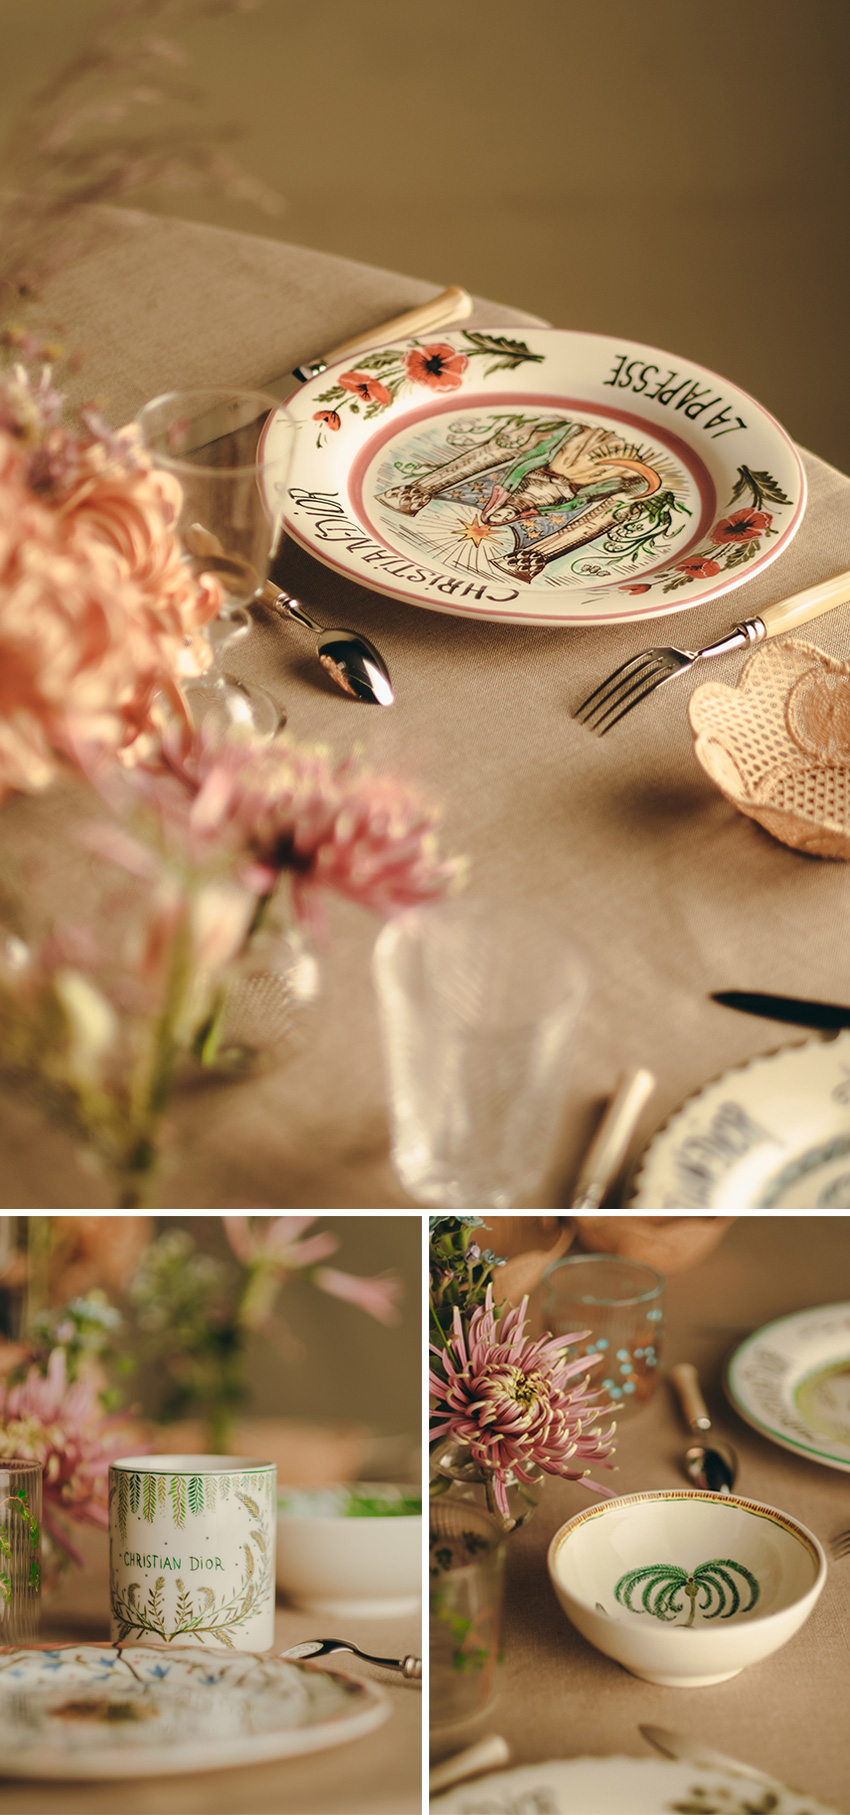 Dior maison cruise 2021 bucolic registry collection featured in Perfect Wedding Magazine